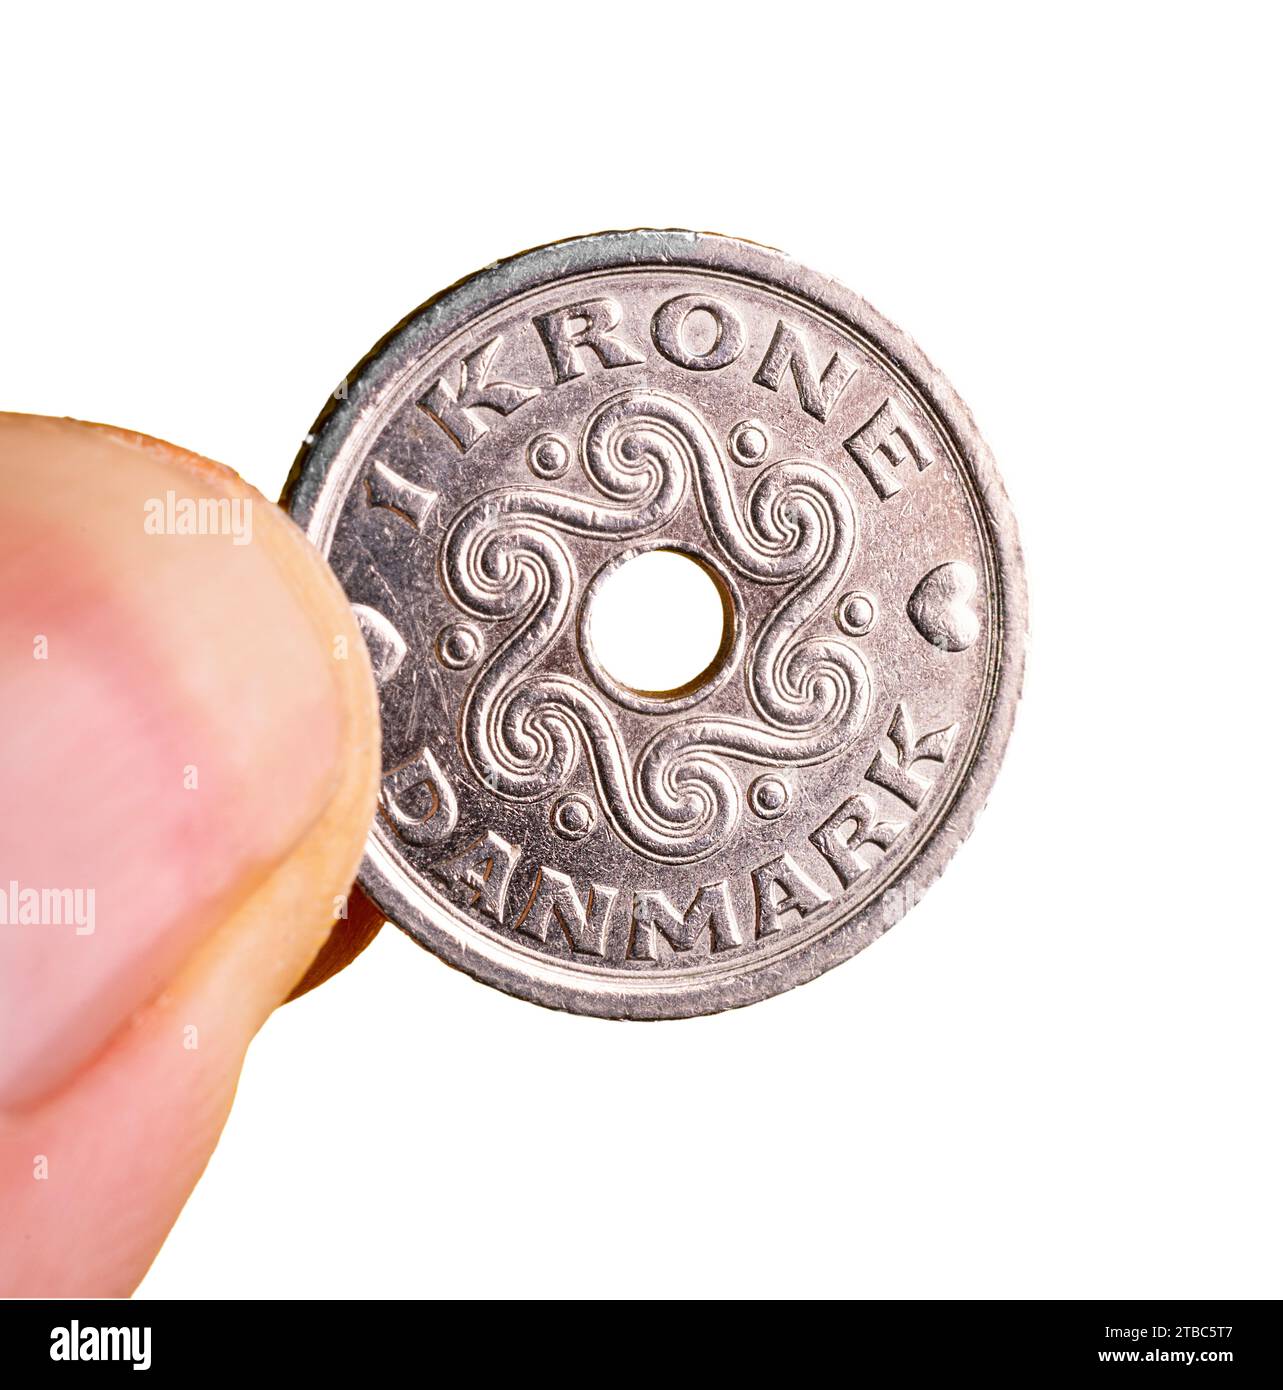 a Danish krone coin between the fingers of the hand with a transparent background Stock Photo